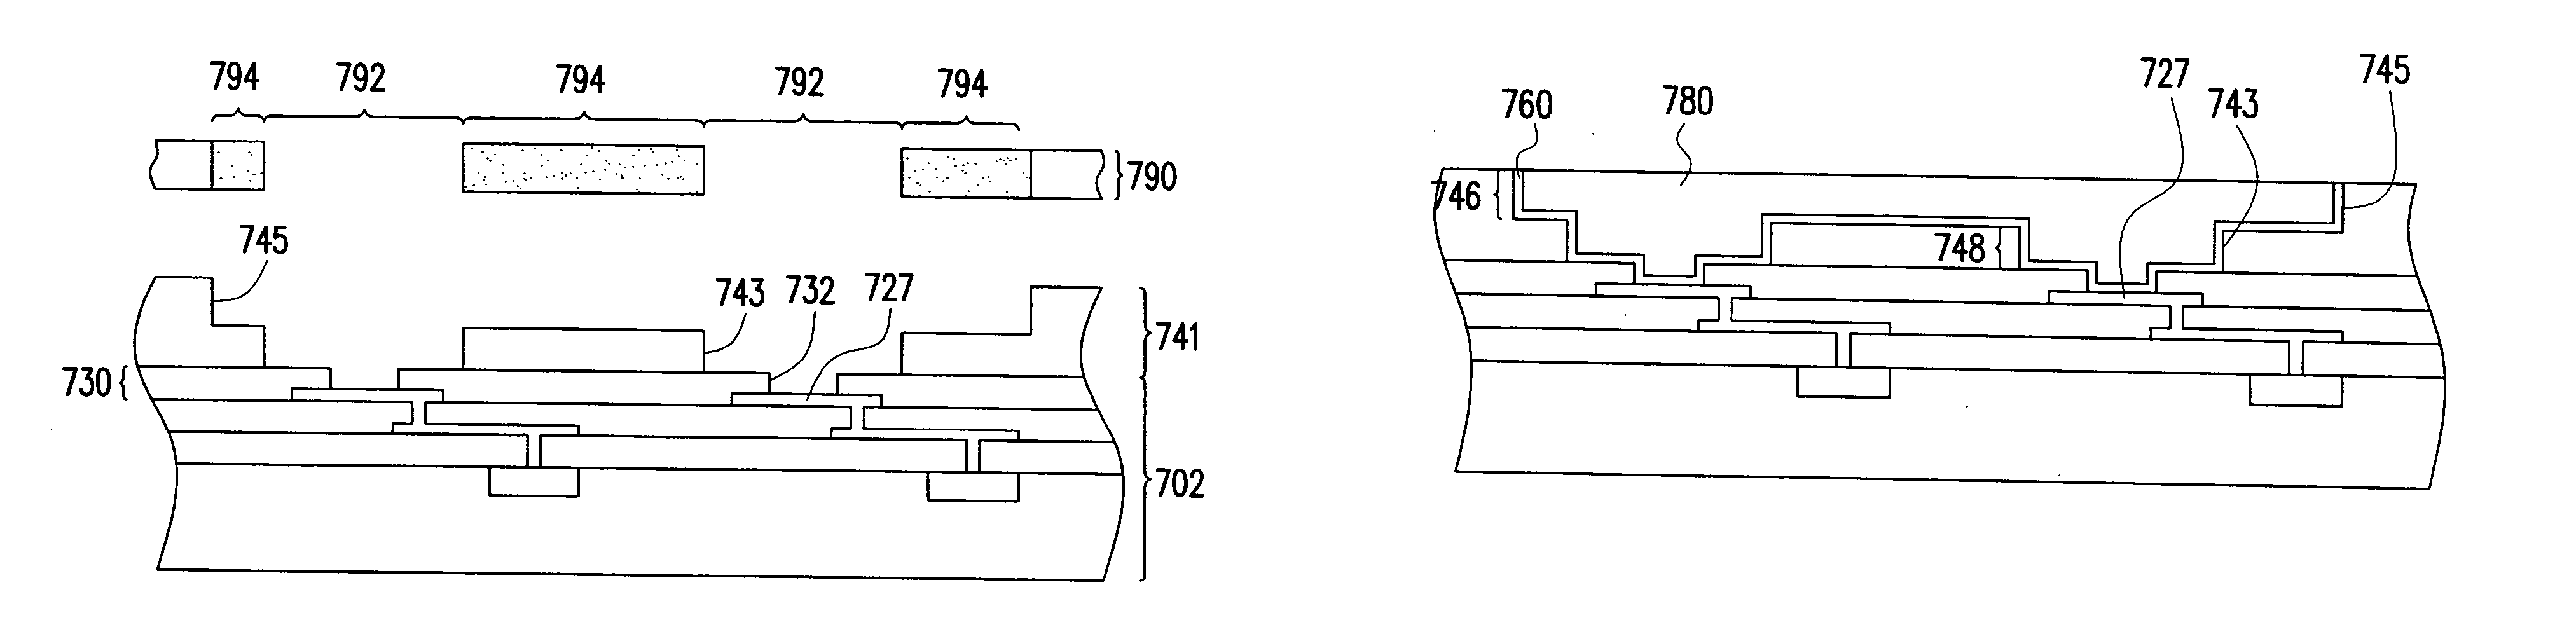 Chip structure and process for forming the same